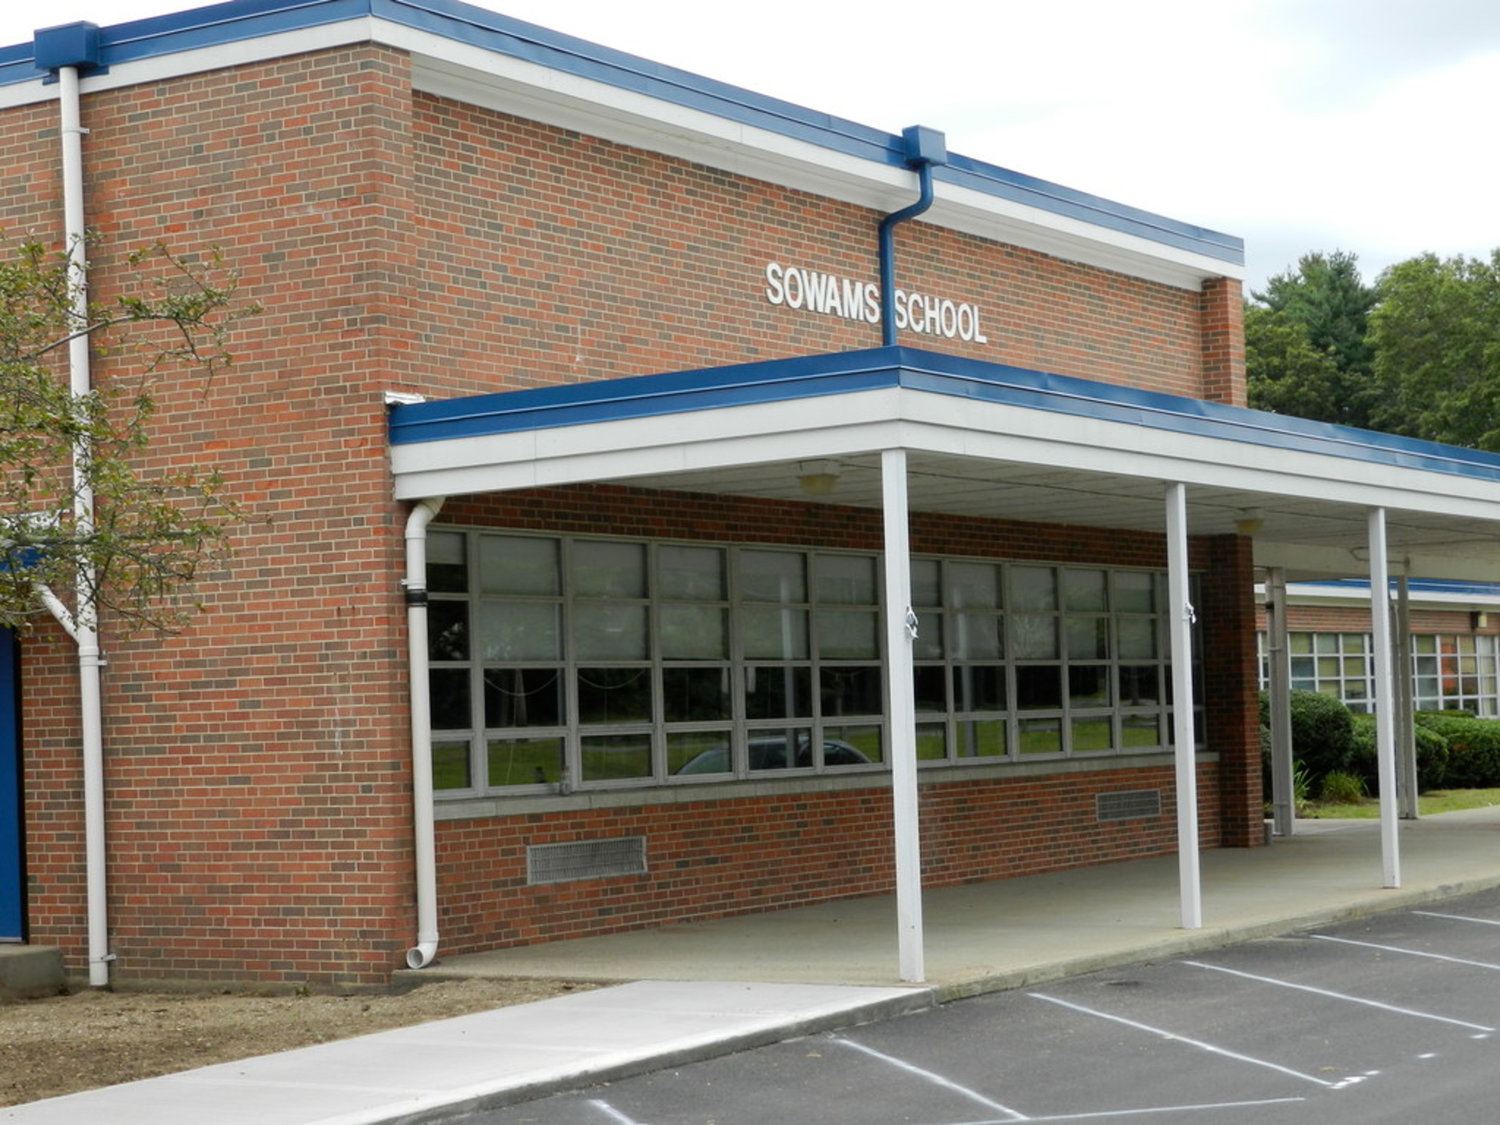 A recent facilities study revealed that Sowams School (shown) needs $9.15 million in repairs.